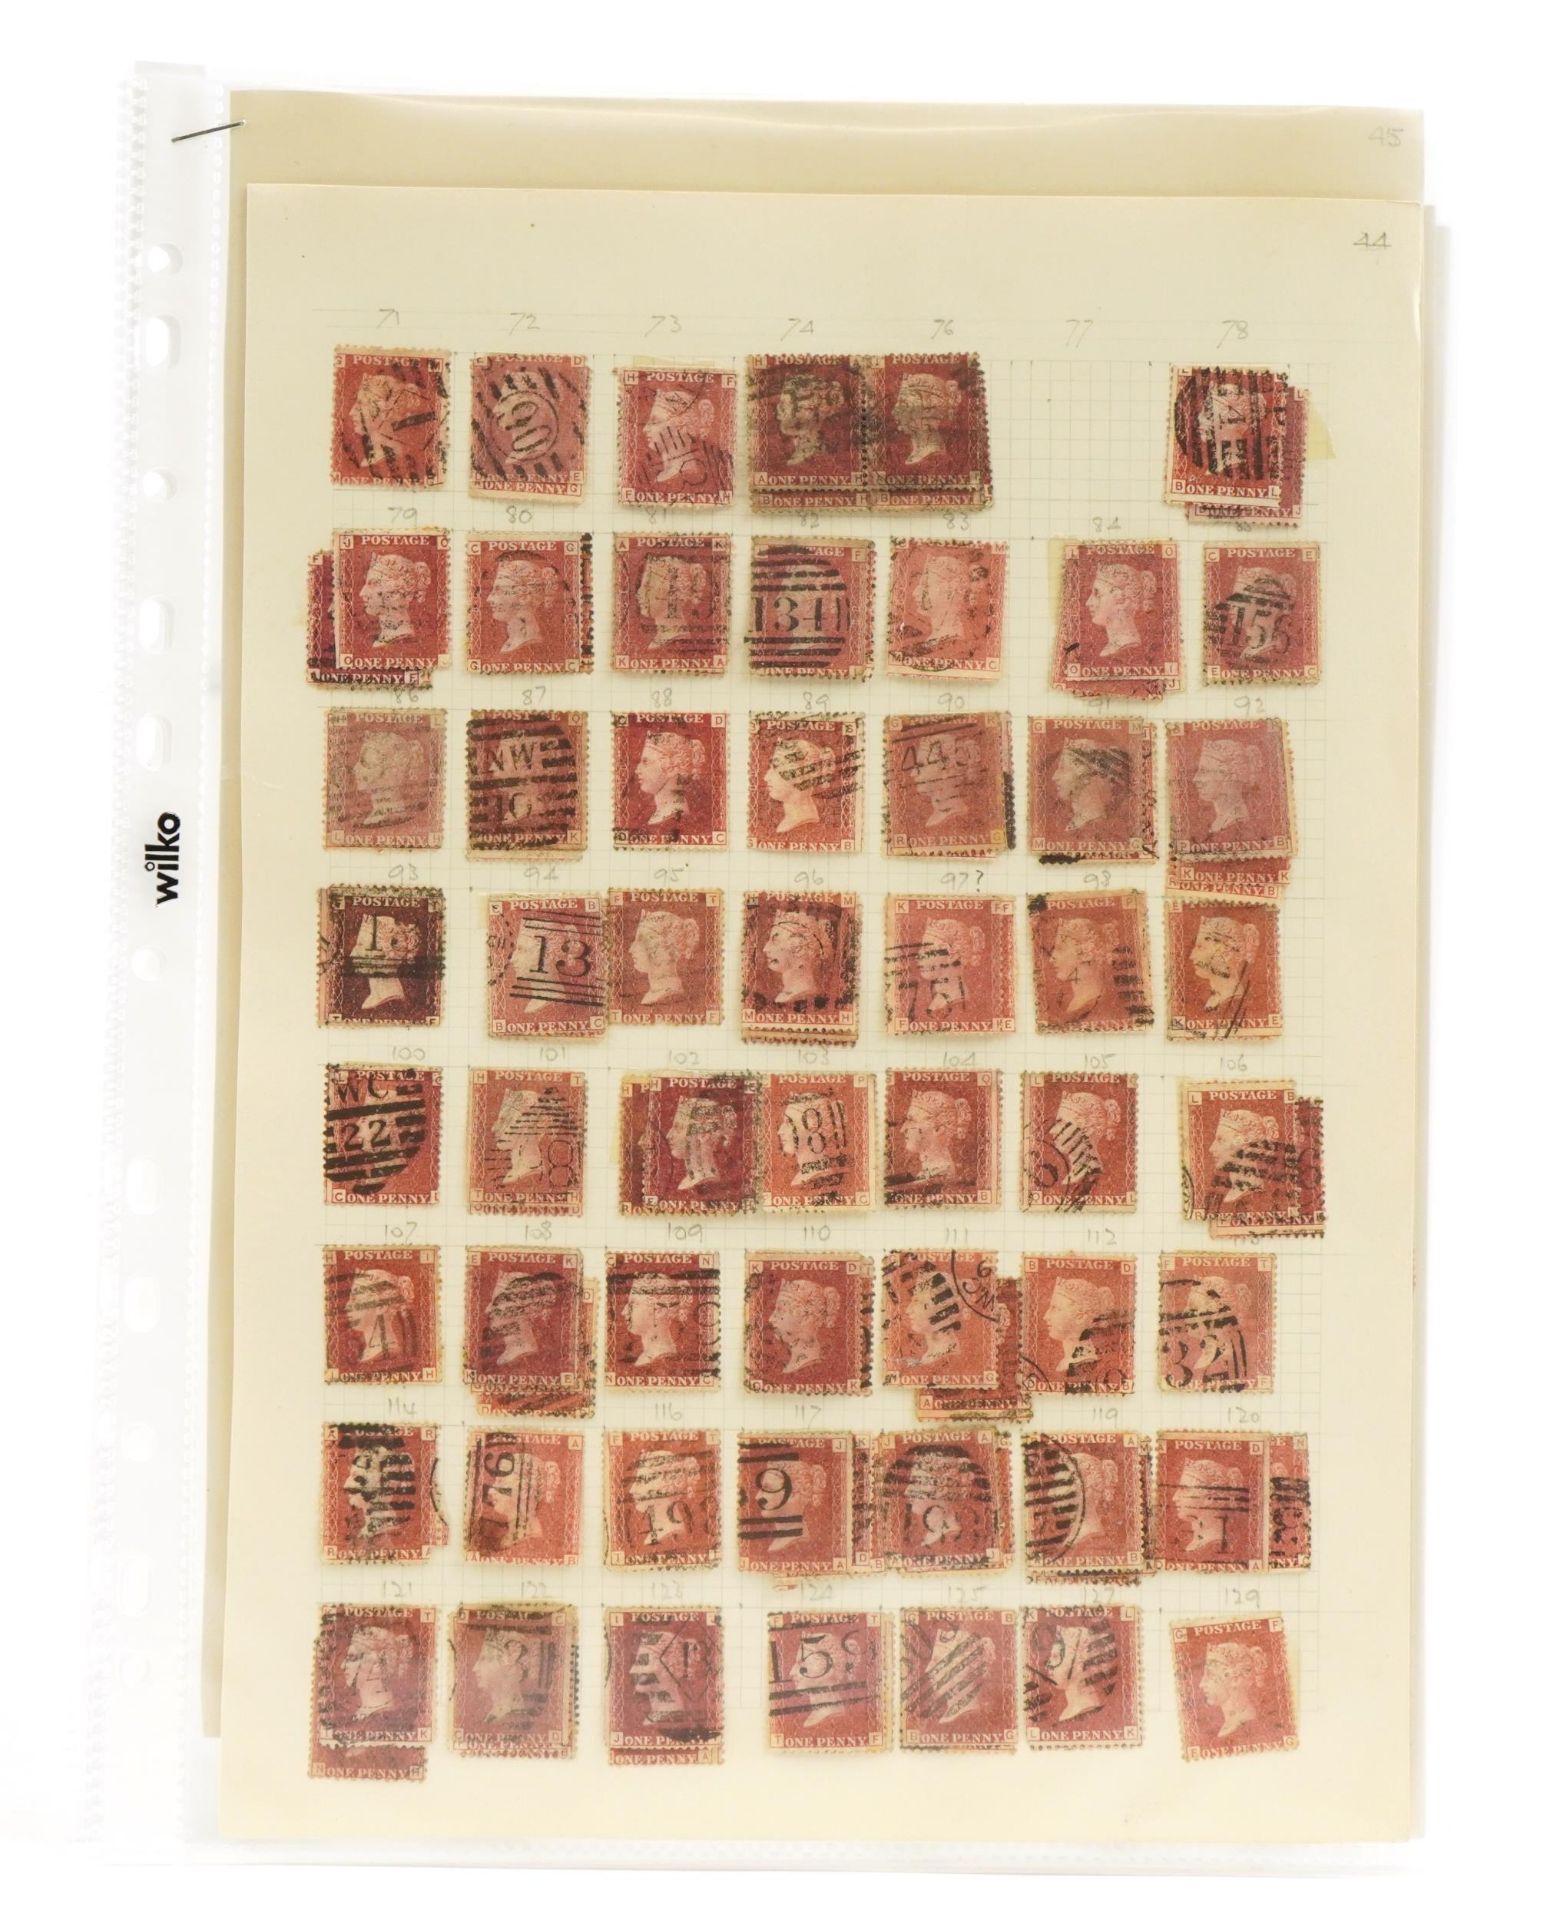 Collection of Penny Reds on four pages For further information on this lot please contact the